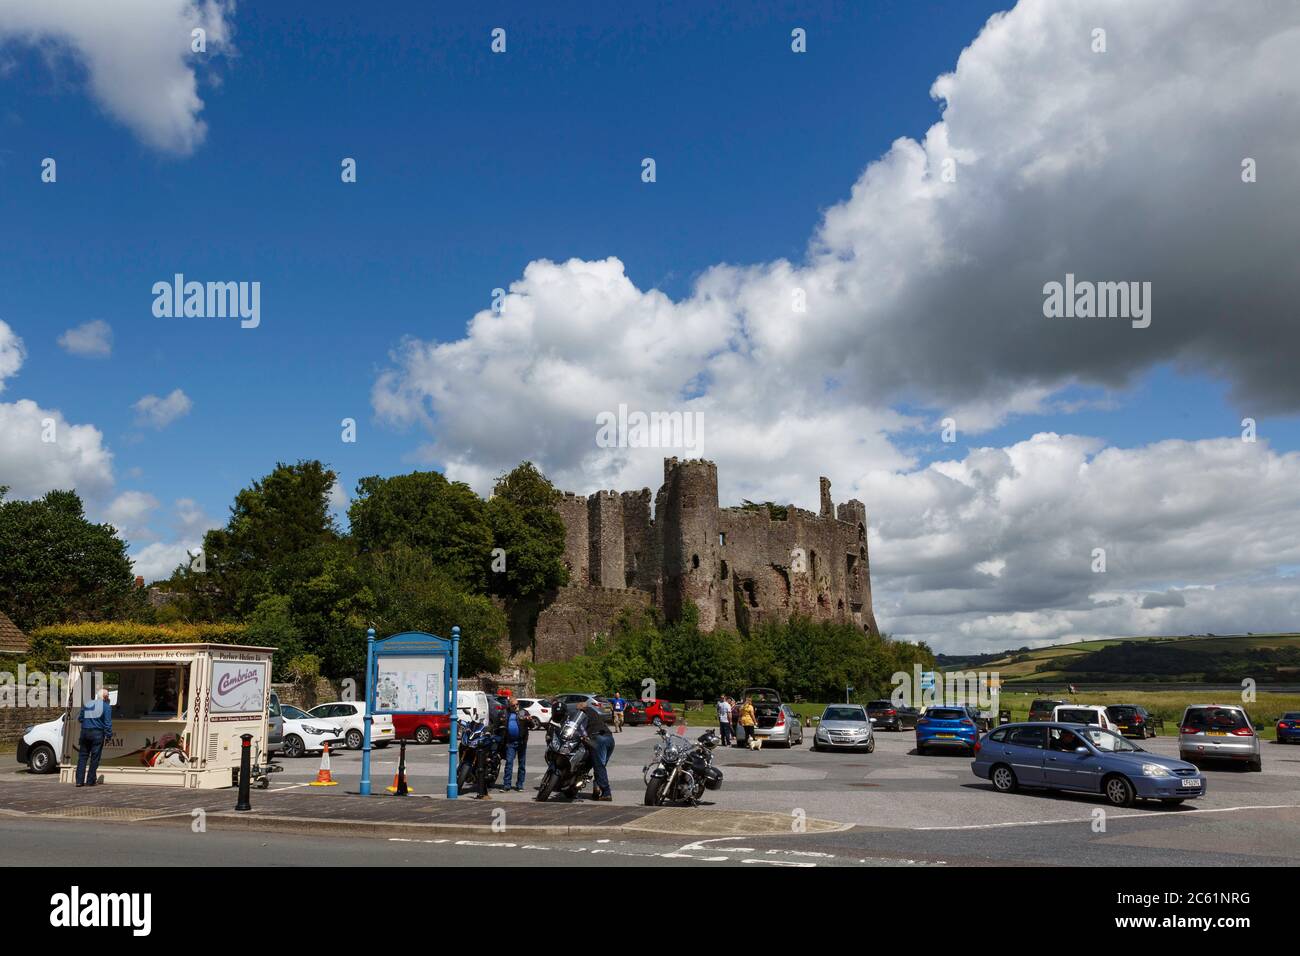 Laugharne, Carmarthenshire, Wales, UK. 6 July, 2020. On the first day that Wales' five mile travel restriction is lifted, people head to Laugharne, Carmarthenshire for a day out, with the car park near Laugharne castle full. Credit: Gruffydd Ll. Thomas/Alamy Live News Stock Photo